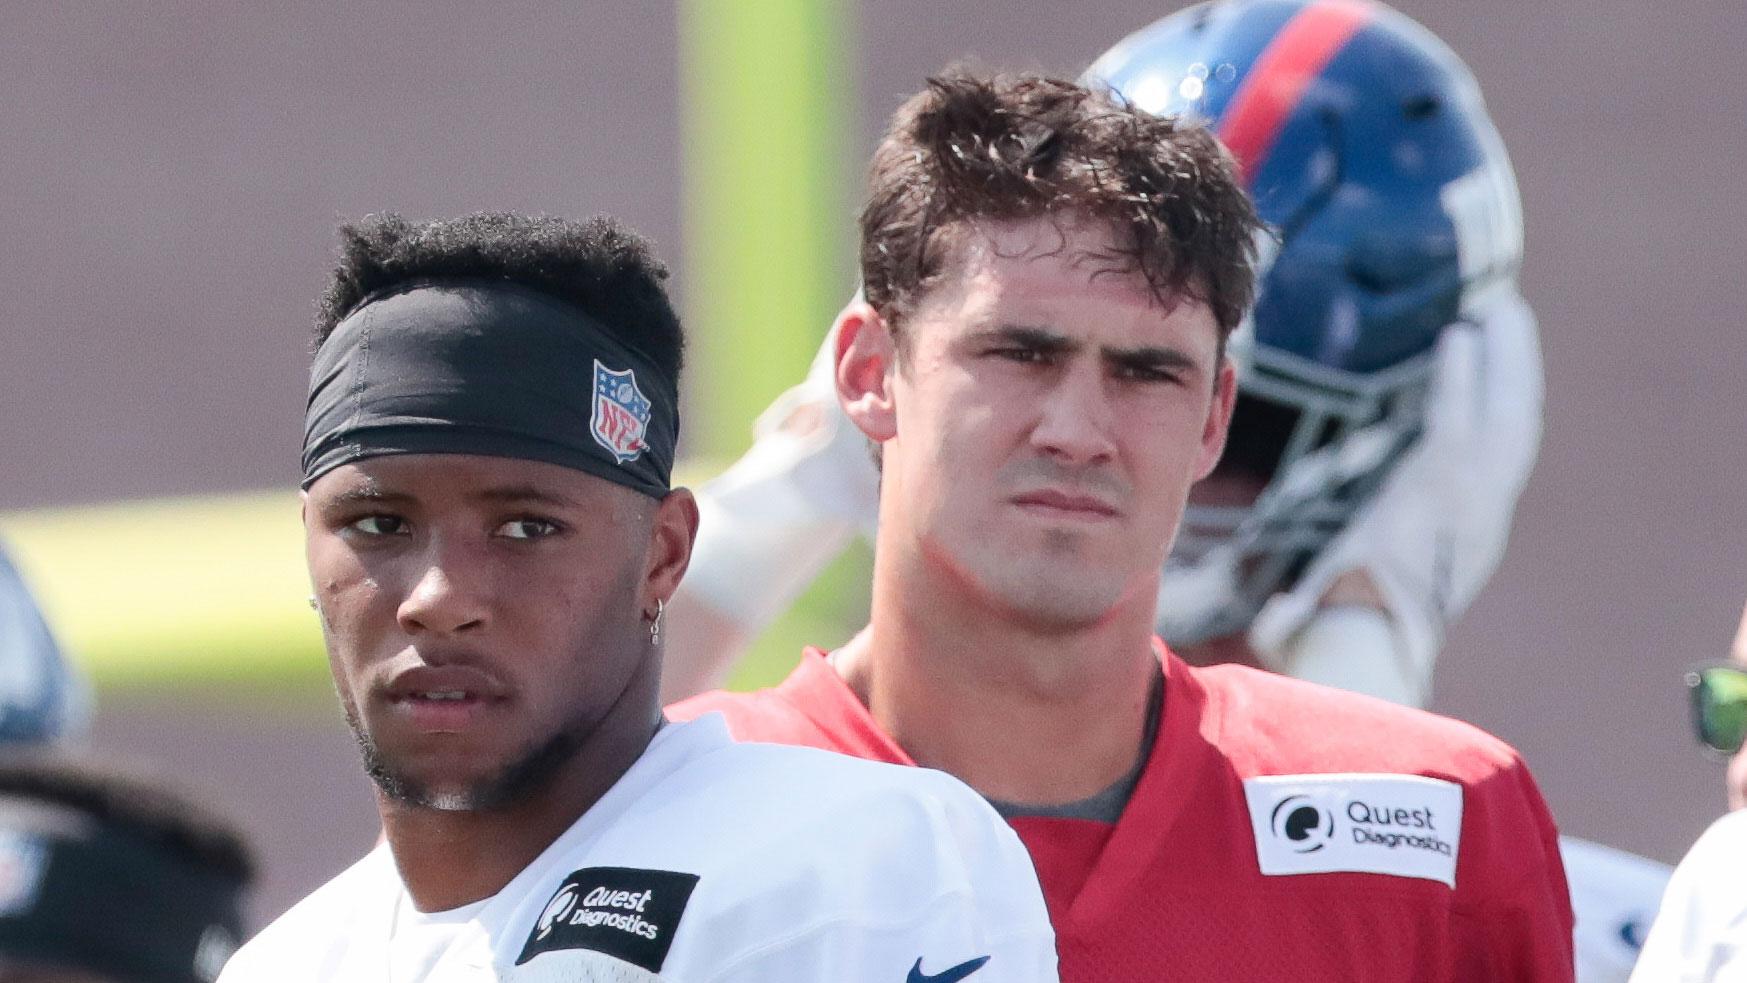 Jul 25, 2019; East Rutherford, NJ, USA; New York Giants running back Saquon Barkley (26) and quarterback Daniel Jones (8) look on during the first day of training camp at Quest Diagnostics Training Center. / Vincent Carchietta-USA TODAY Sports